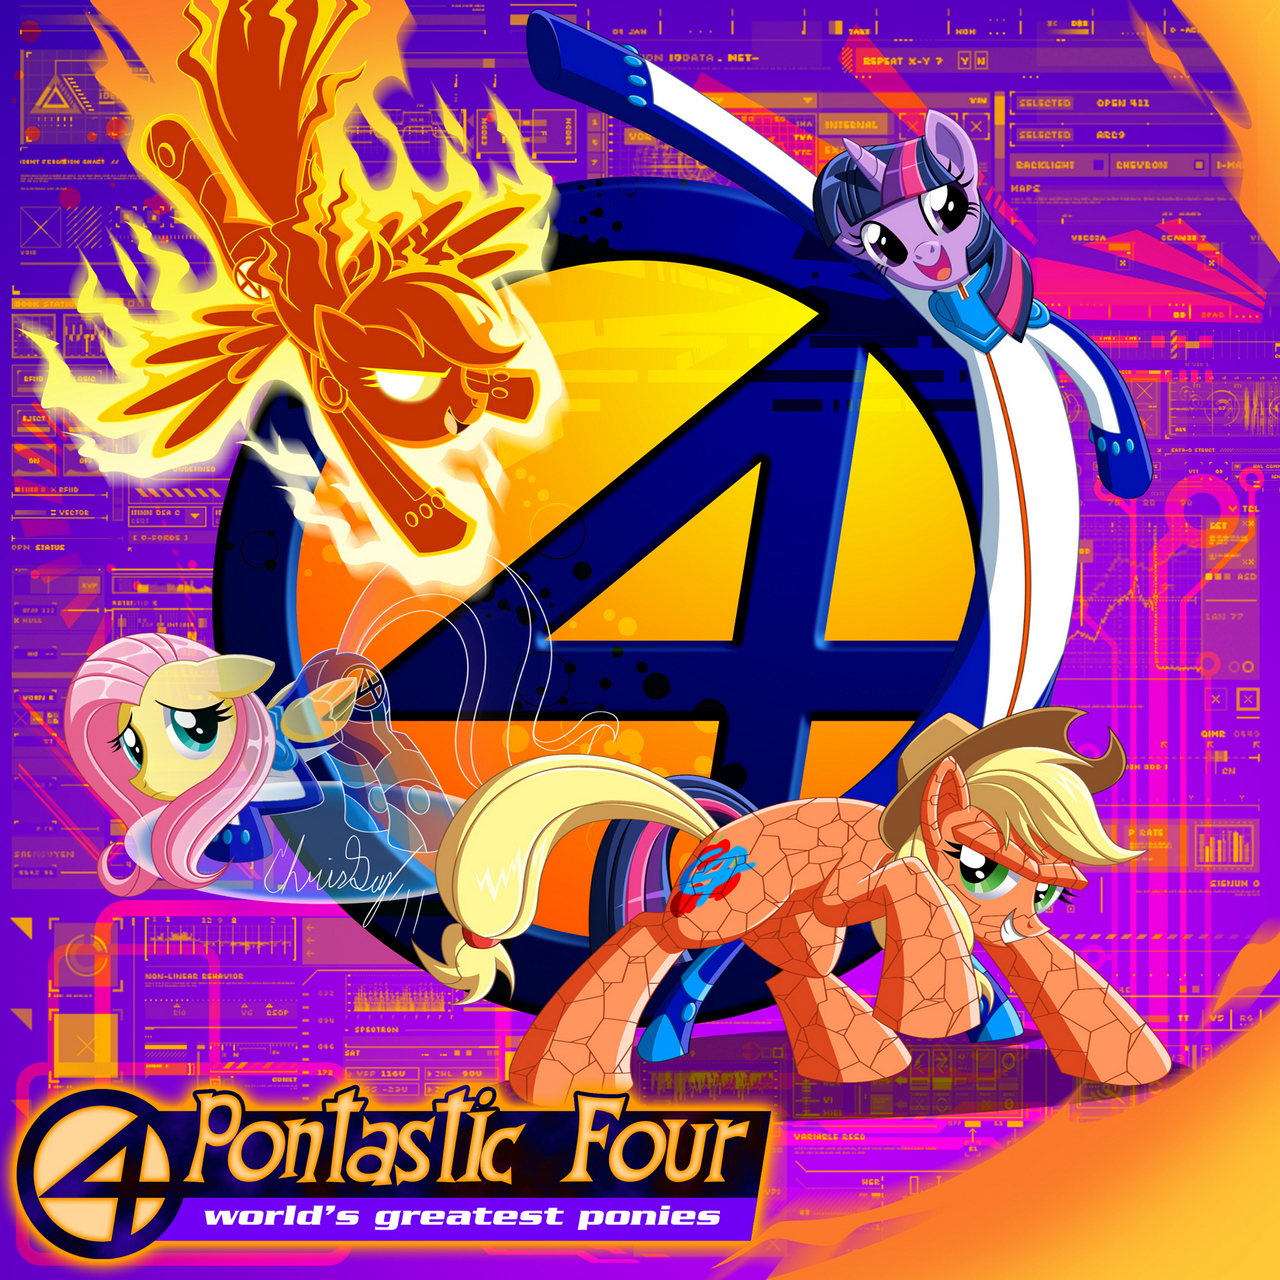 Applejack Mlp Fluttershy Mlp Mr Fantastic Marvel Rainbow Dash Mlp The Human Torch Marvel The Invisible Woman Marvel The Thing Marvel Twilight Sparkle Mlp By Captricosakar